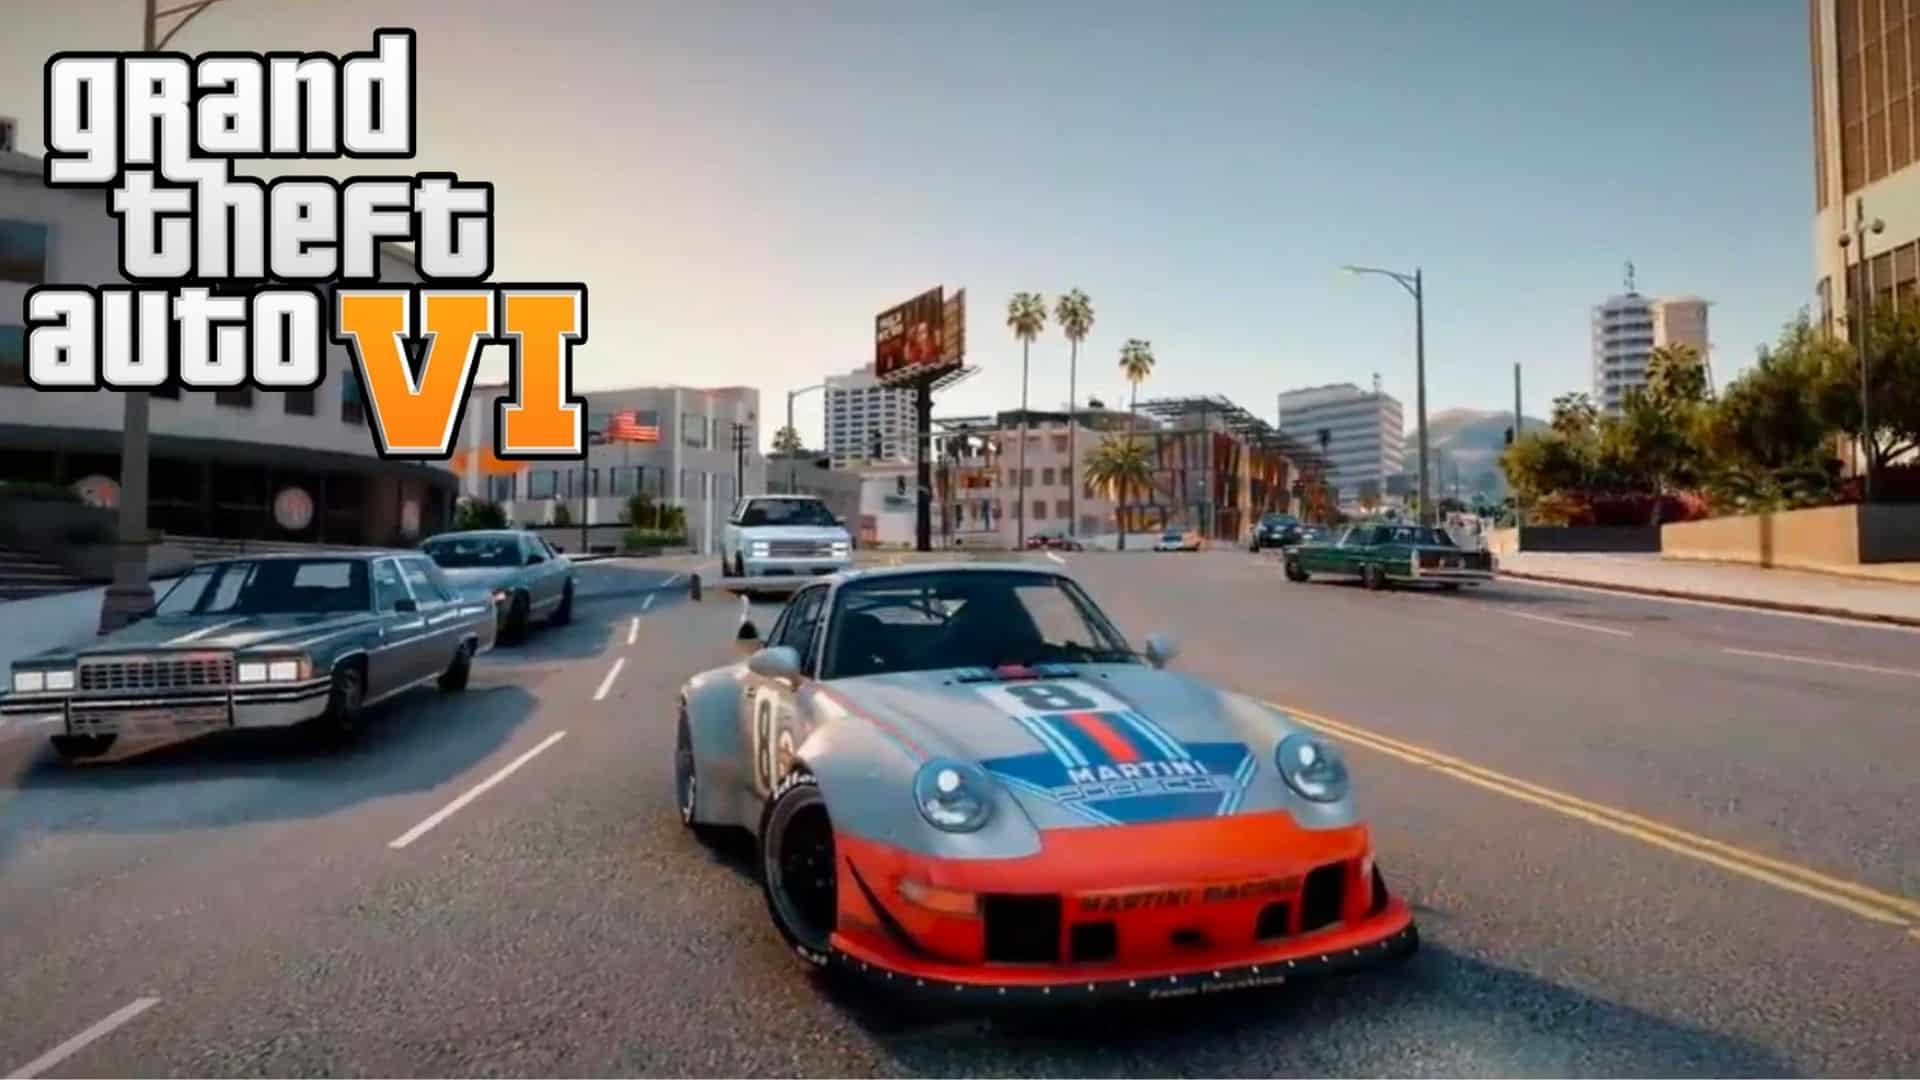 Gta 6 Trailers Are Appearing On Youtube Ads But Theyre Just Fake